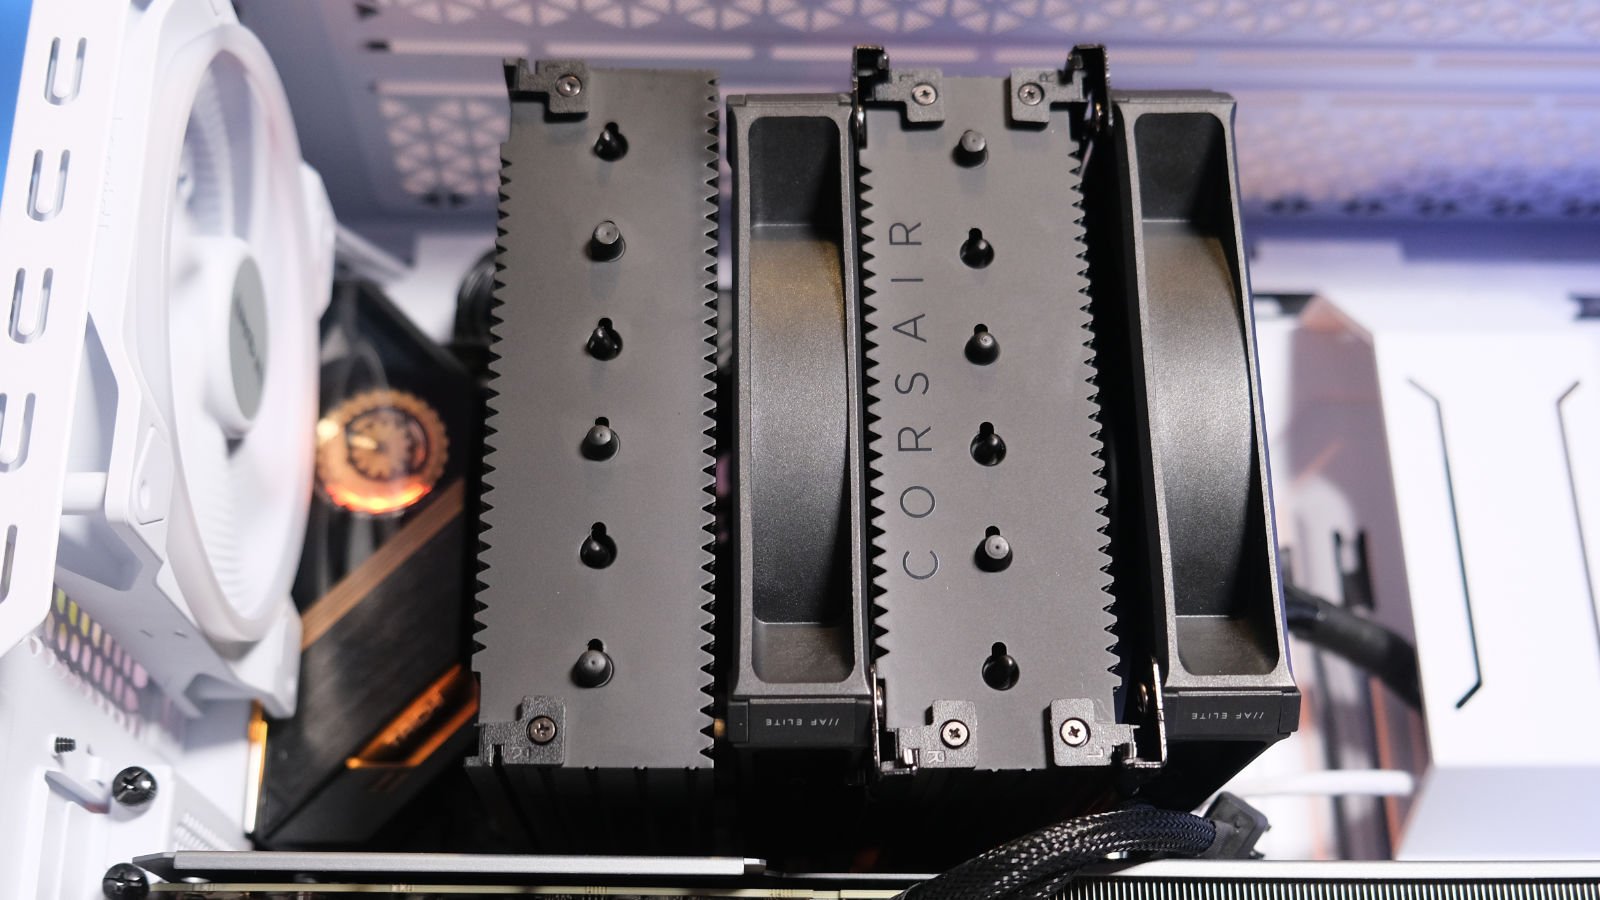 Corsair A115 CPU cooler mounted inside a PC case - Club386 Approved.